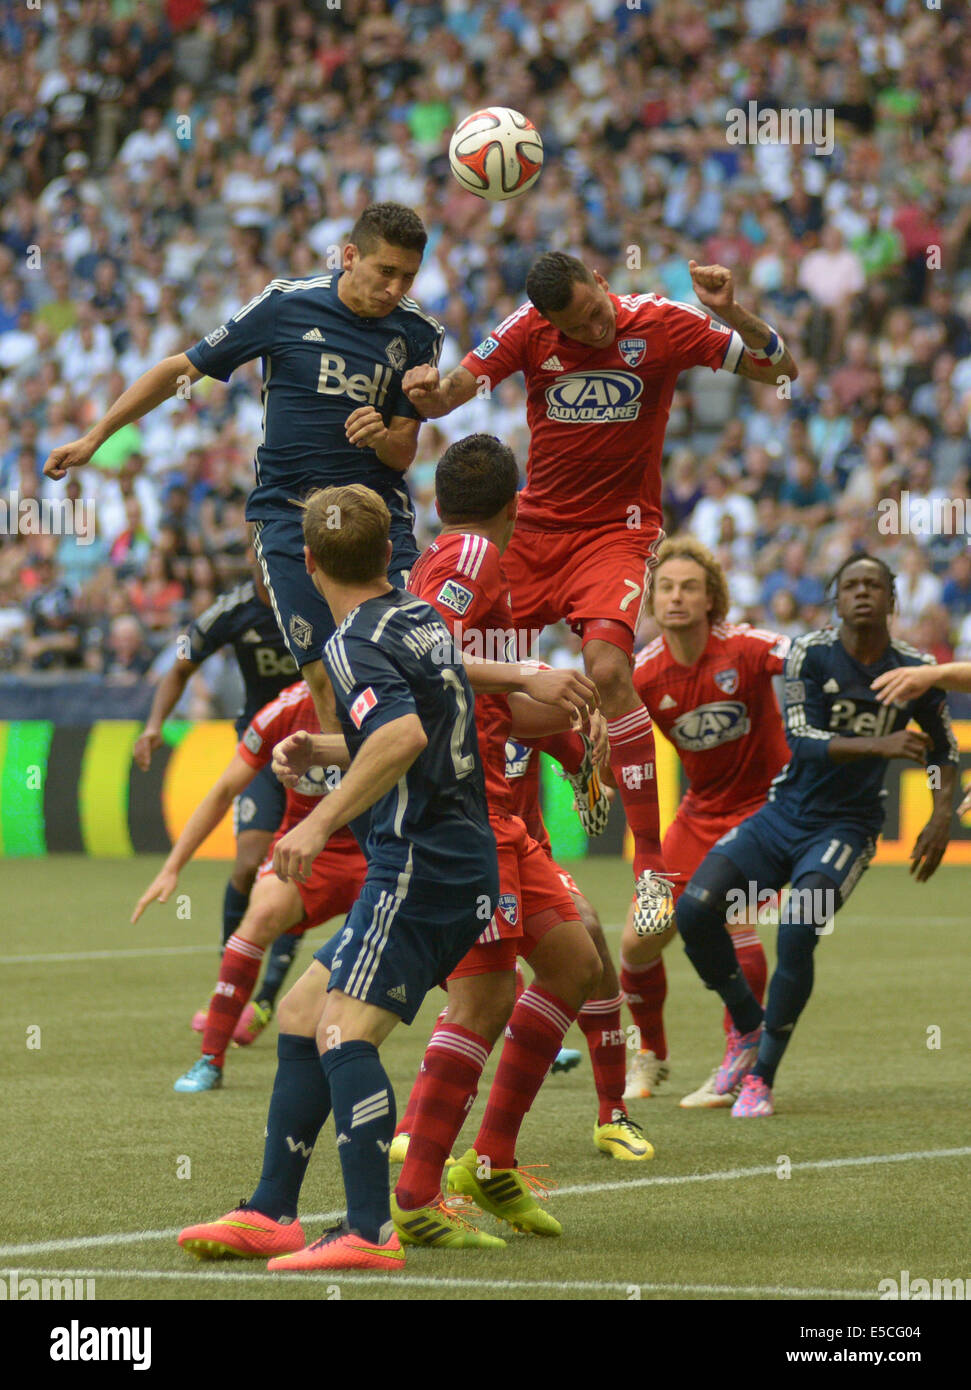 Vancouver, Canada. 27th July, 2014. Vancouver Whitecaps' Johnny Leveron (L) vies with FC Dallas' Blas Perez during their MLS soccer game at BC Place in Vancouver, Canada, on July 27, 2014. Vancouver Whitecaps tied FC Dallas 2-2. Credit:  Sergei Bachlakov/Xinhua/Alamy Live News Stock Photo